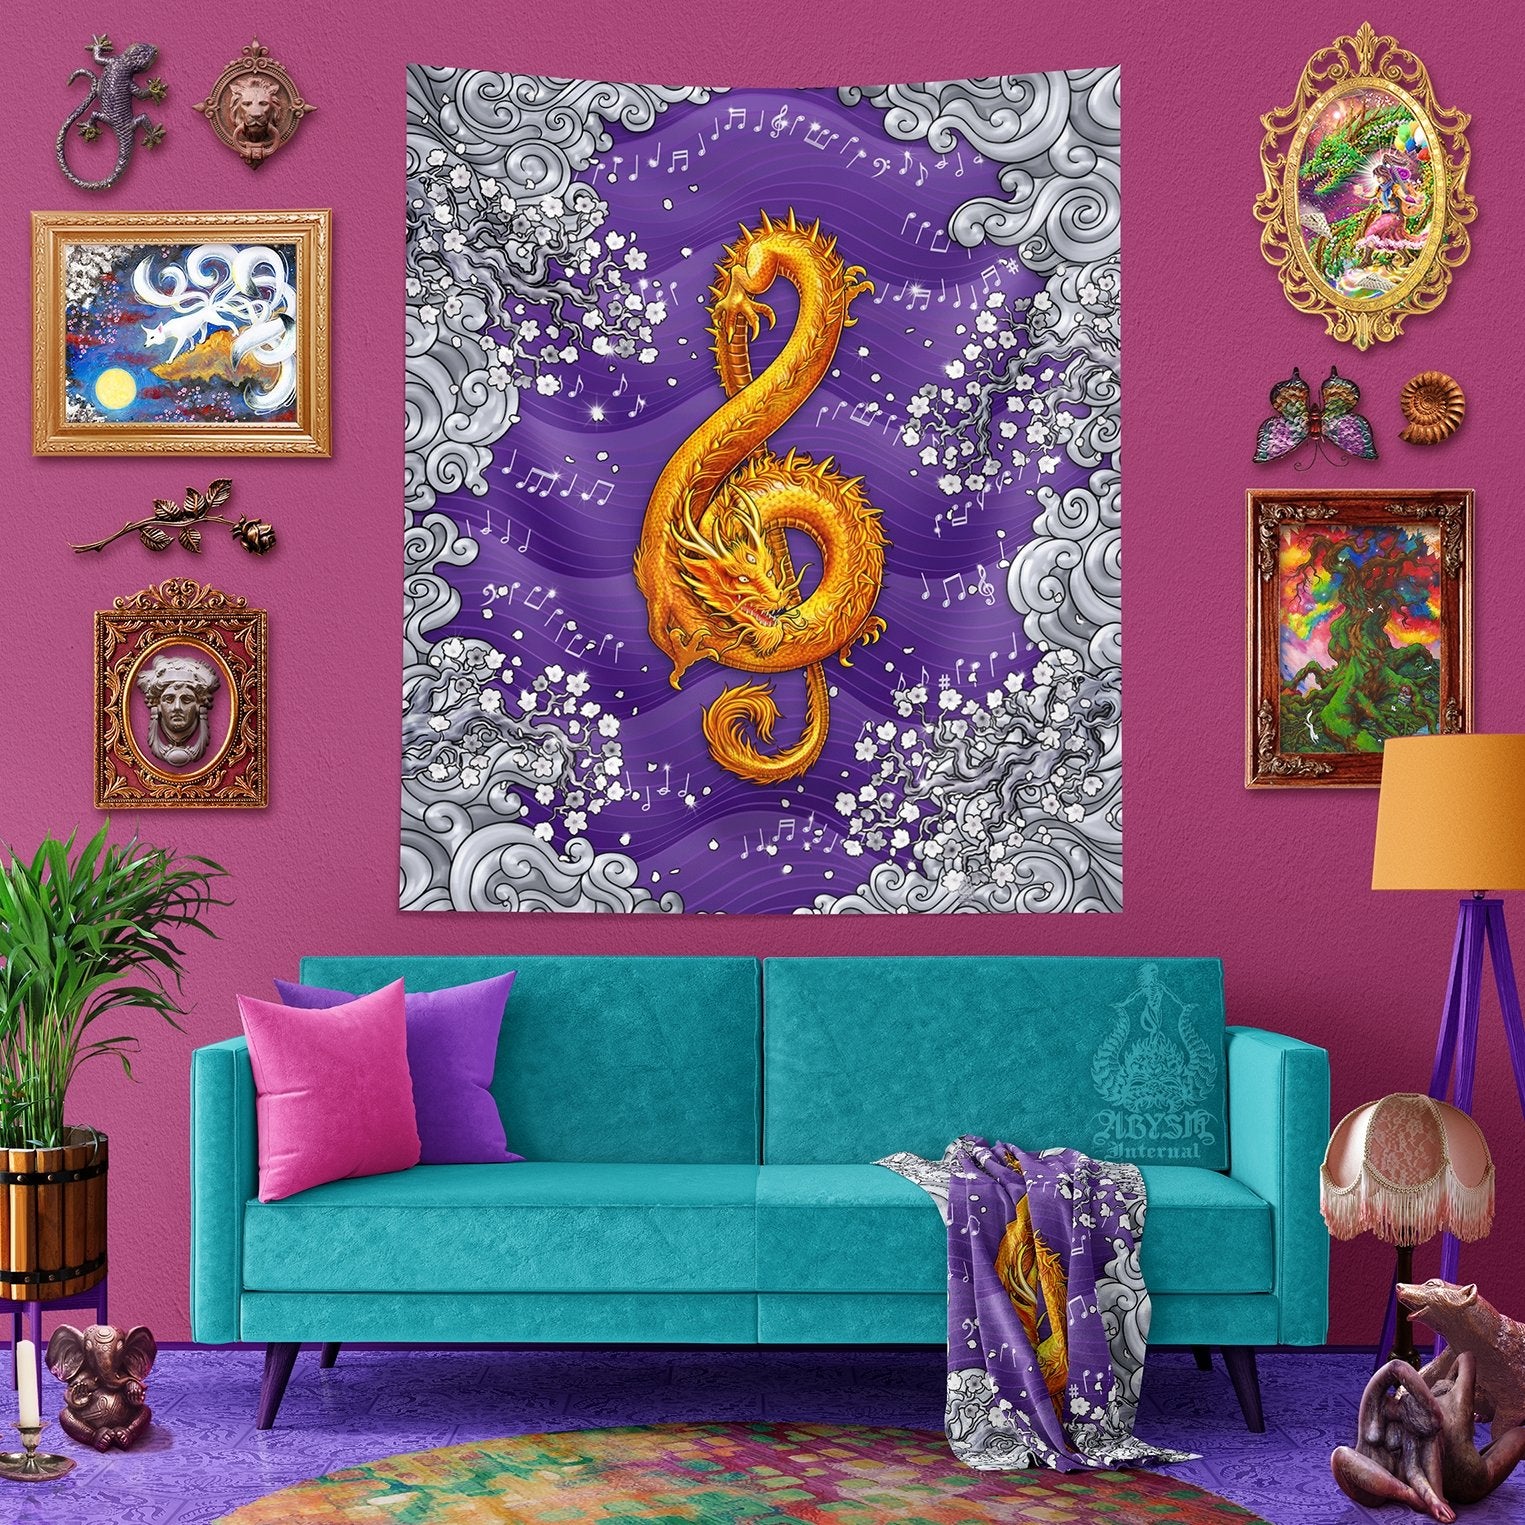 Holographic Tapestry, Music Wall Hanging, Aesthetic Home Decor, Art Print - Pastel Dragon, Yume Kawaii and Fairy Kei, Treble Clef - Abysm Internal